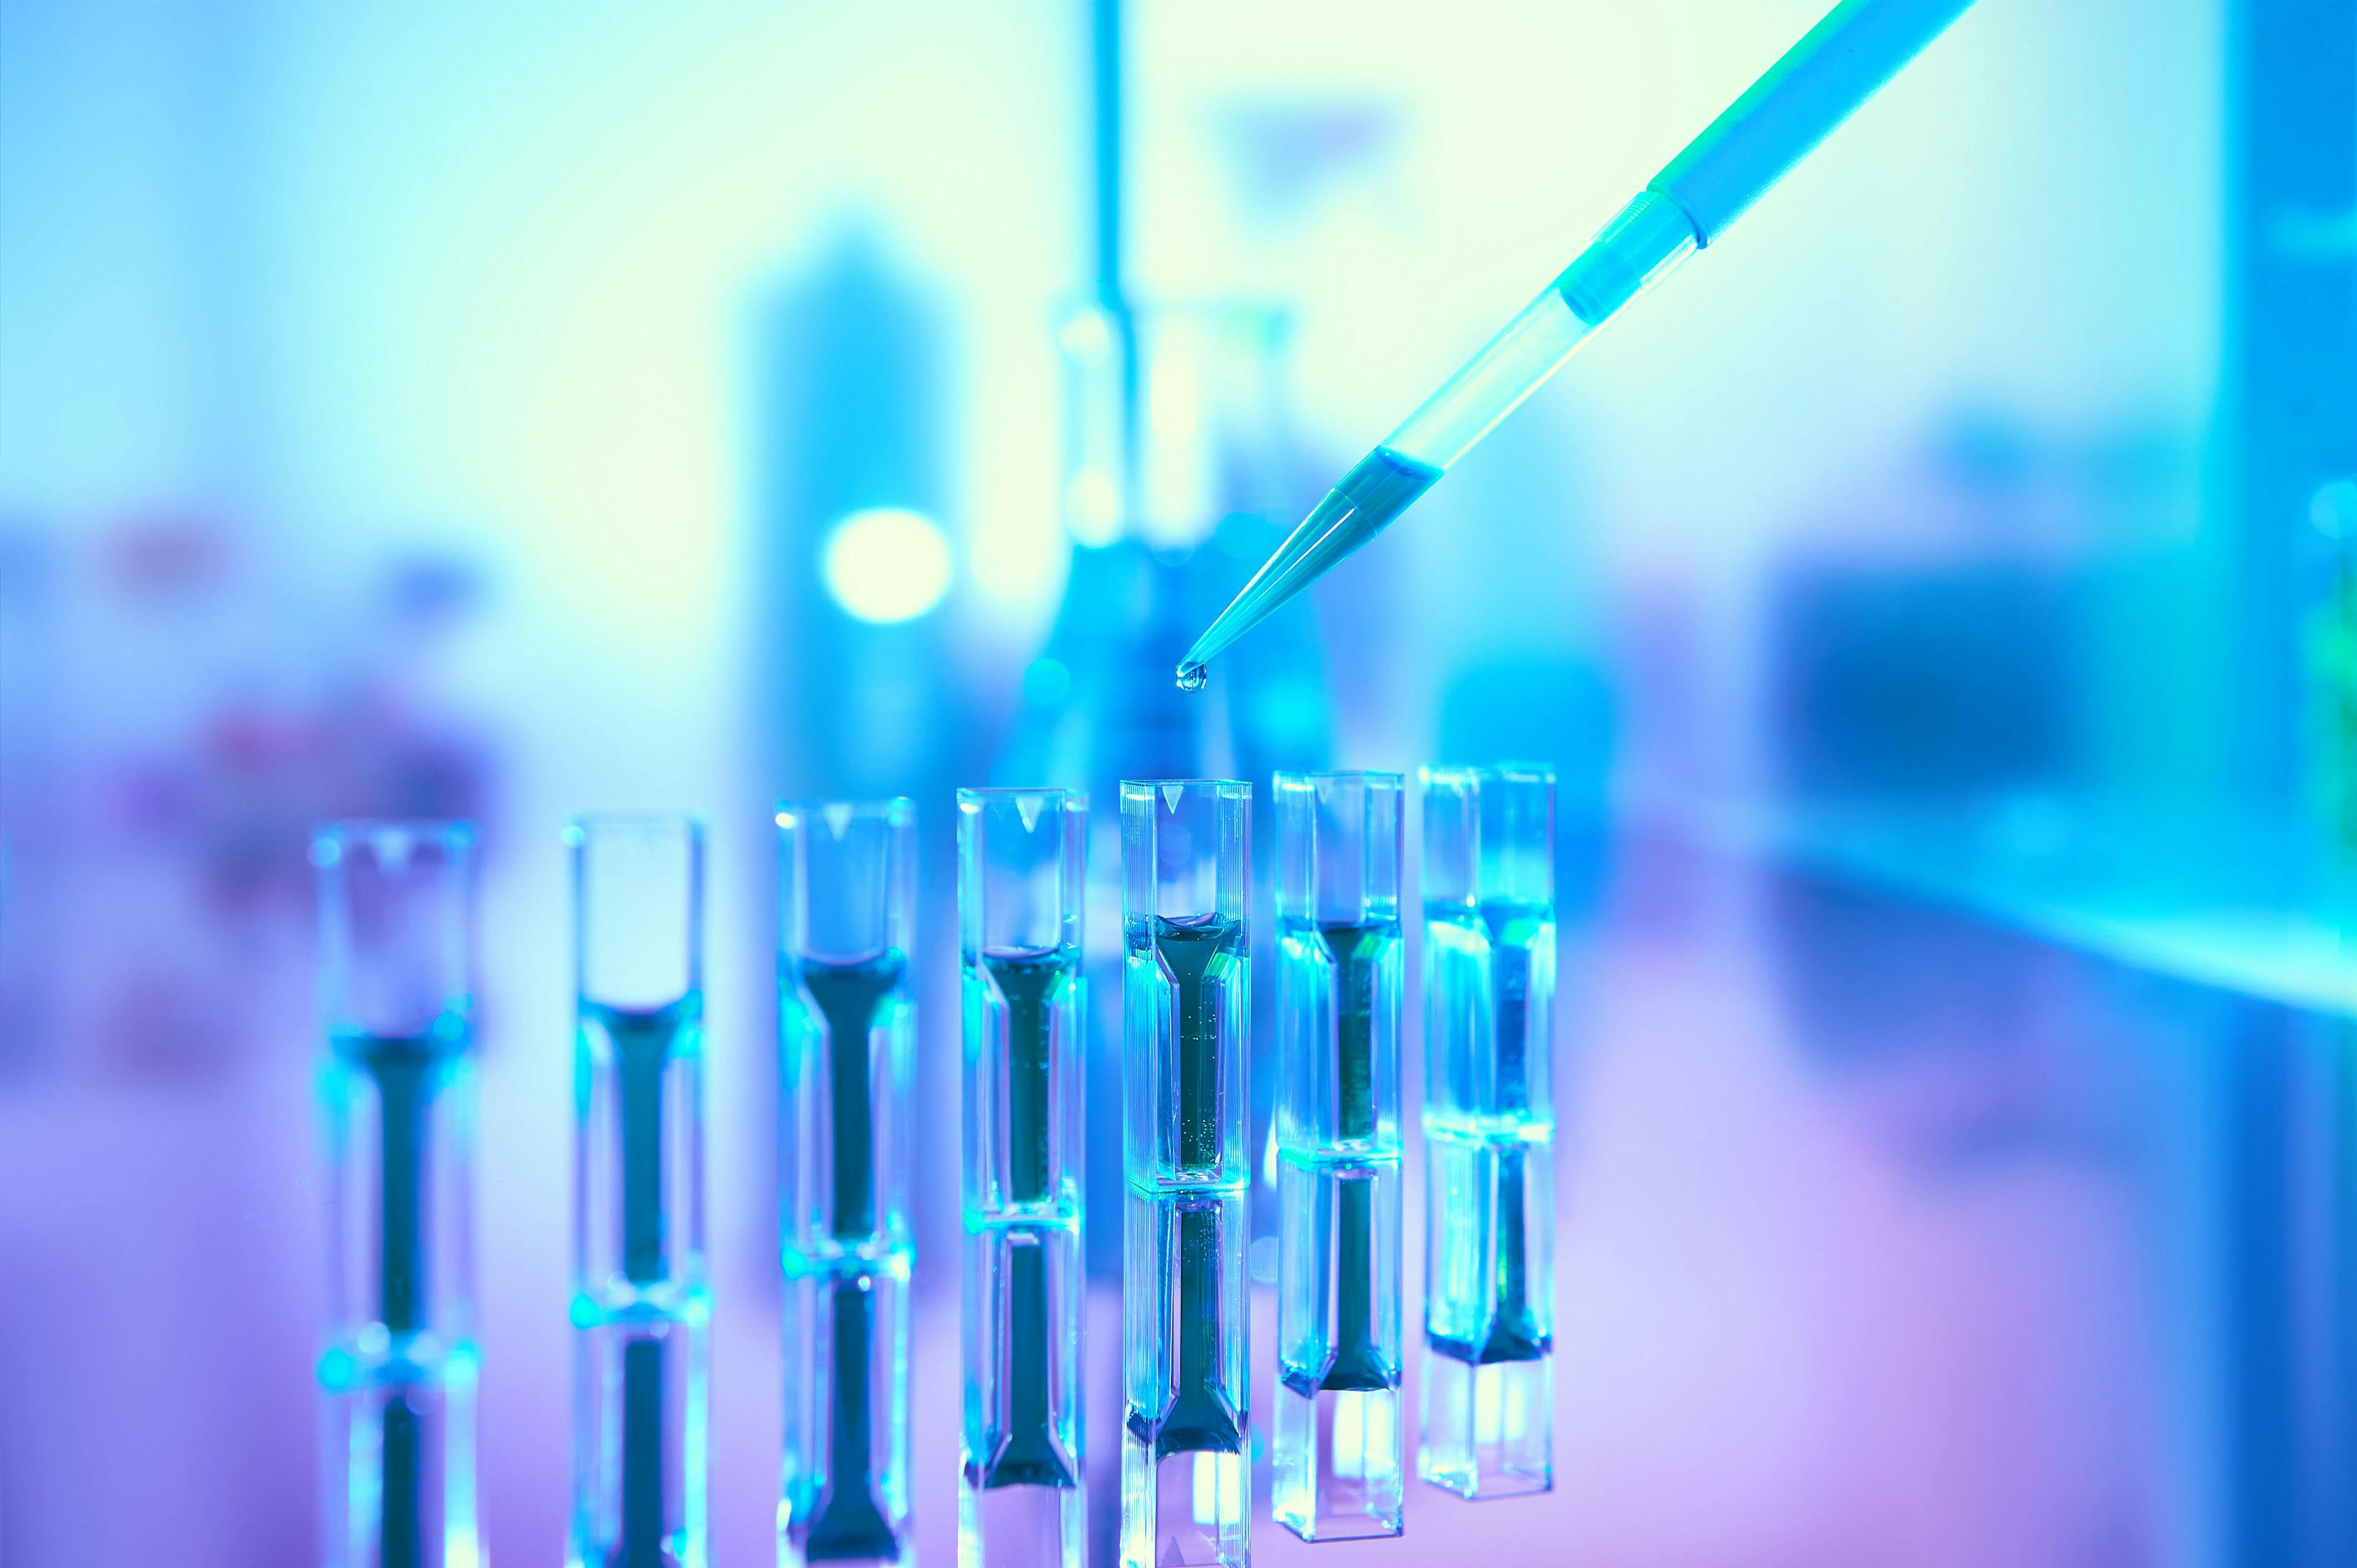 Scientific background in vibrant neon colors, purple, blue and turquoise. Pharma, biotech, protein analysis. Spectrophotometer quvettes on a reflective surface, copy-space., focus on pipette tip. | Image Credit: © tilialucida - stock.adobe.com 